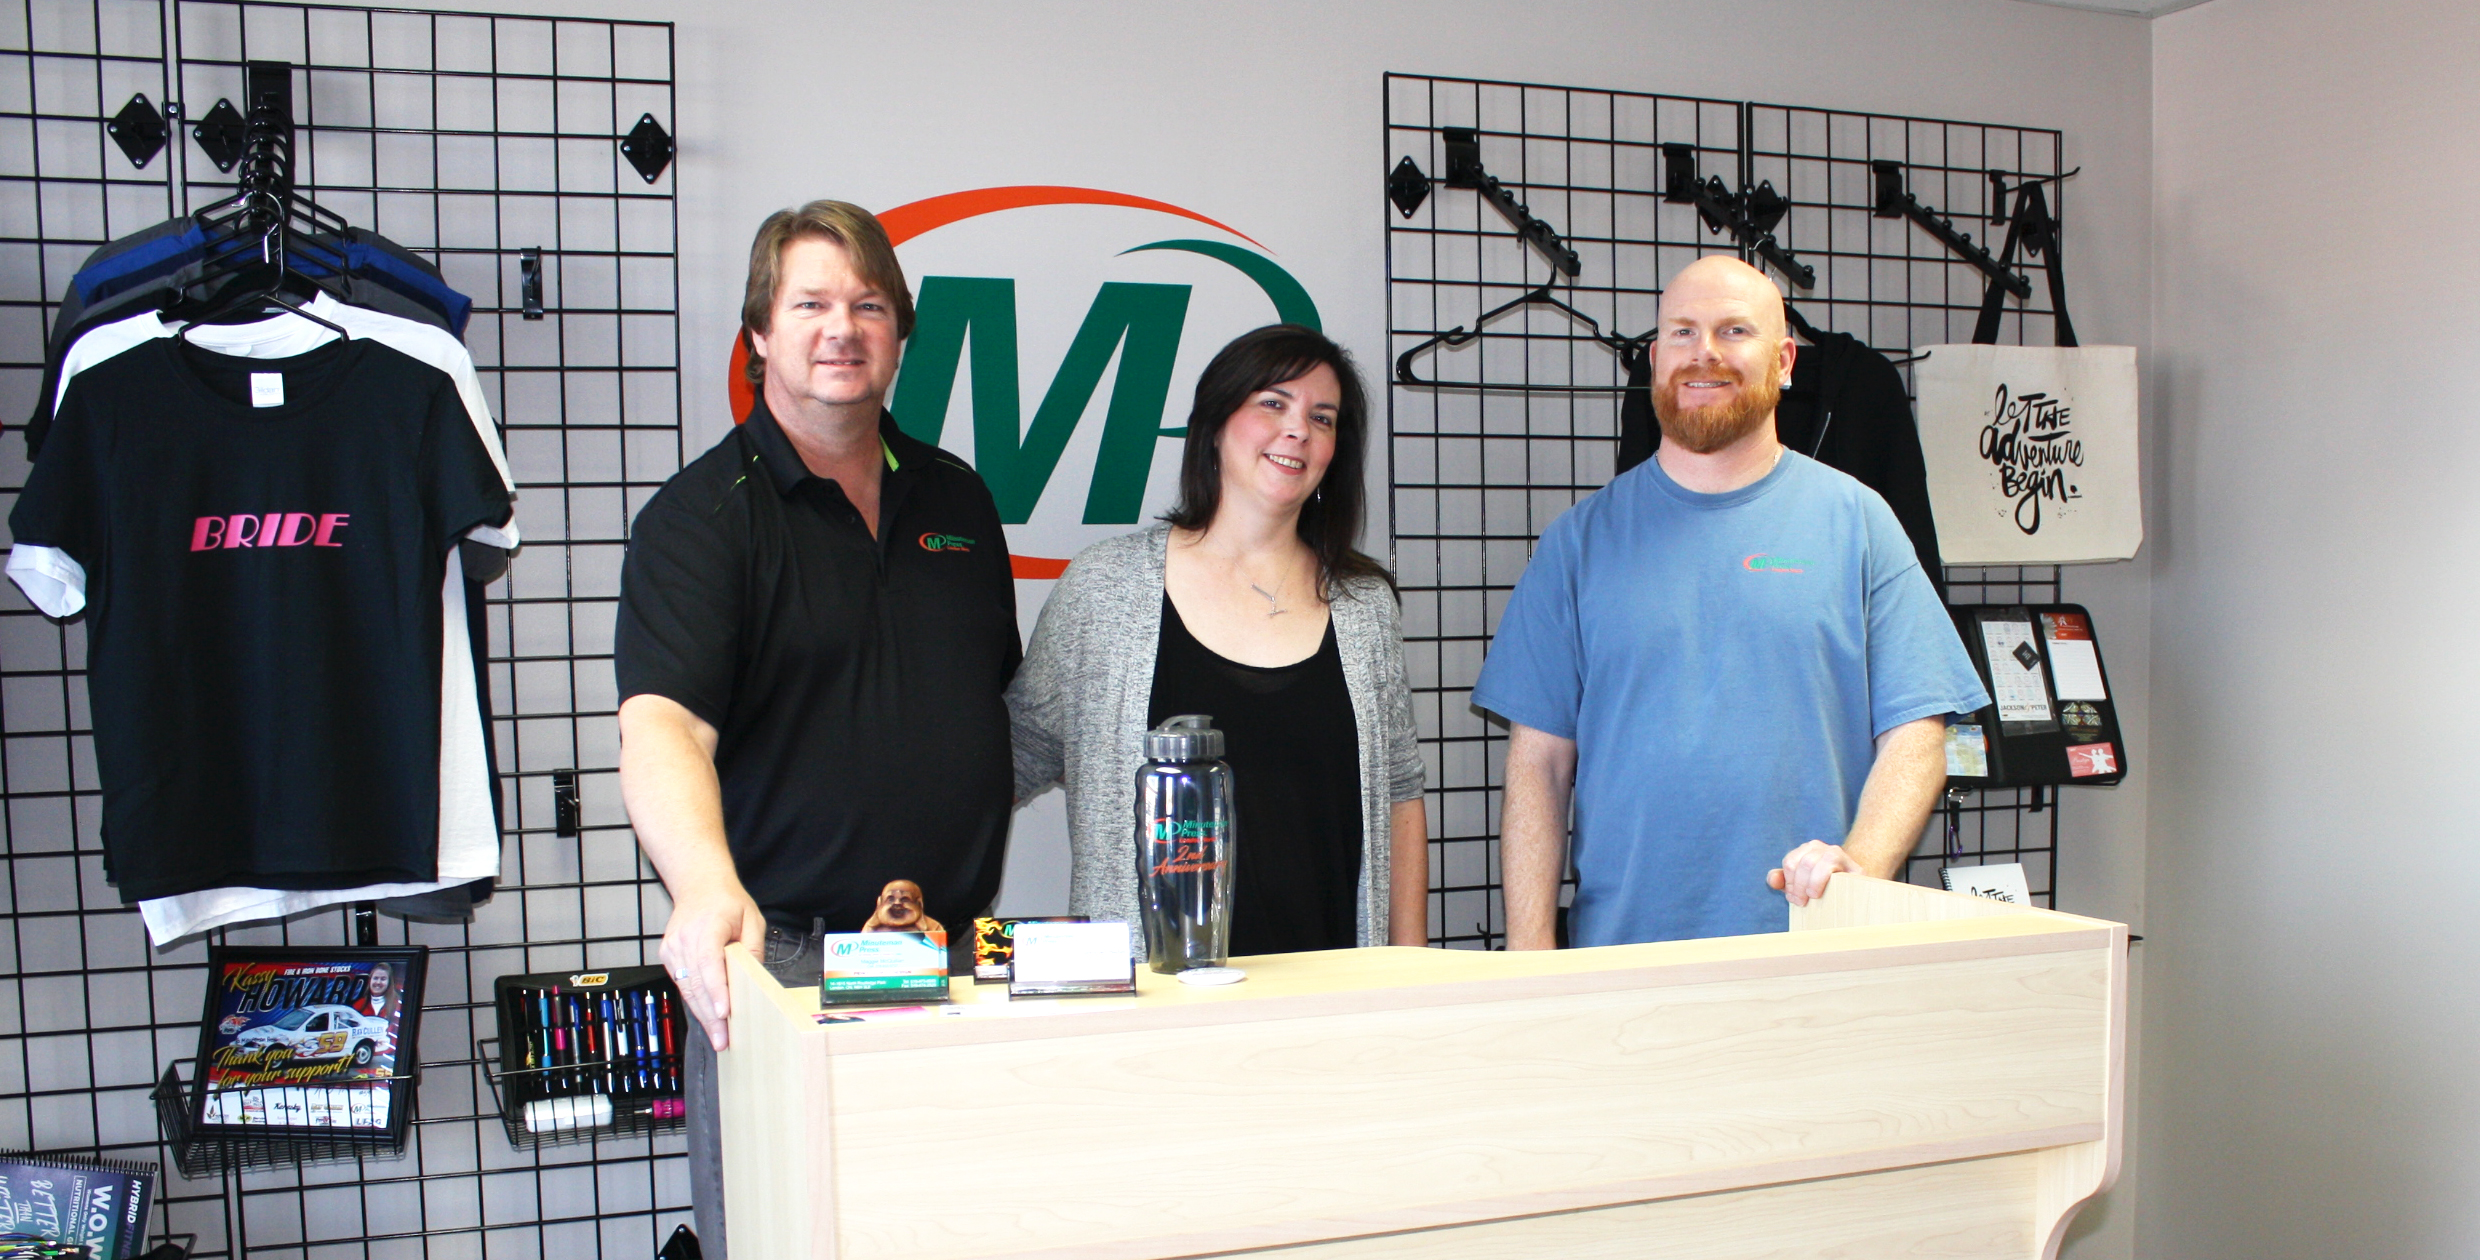 Meet the team of Minuteman Press in London North, Ontario, Canada - from left to right: Gerry McQuillan, owner; Maggie McQuillan, owner; and Jason Cooke, designer.